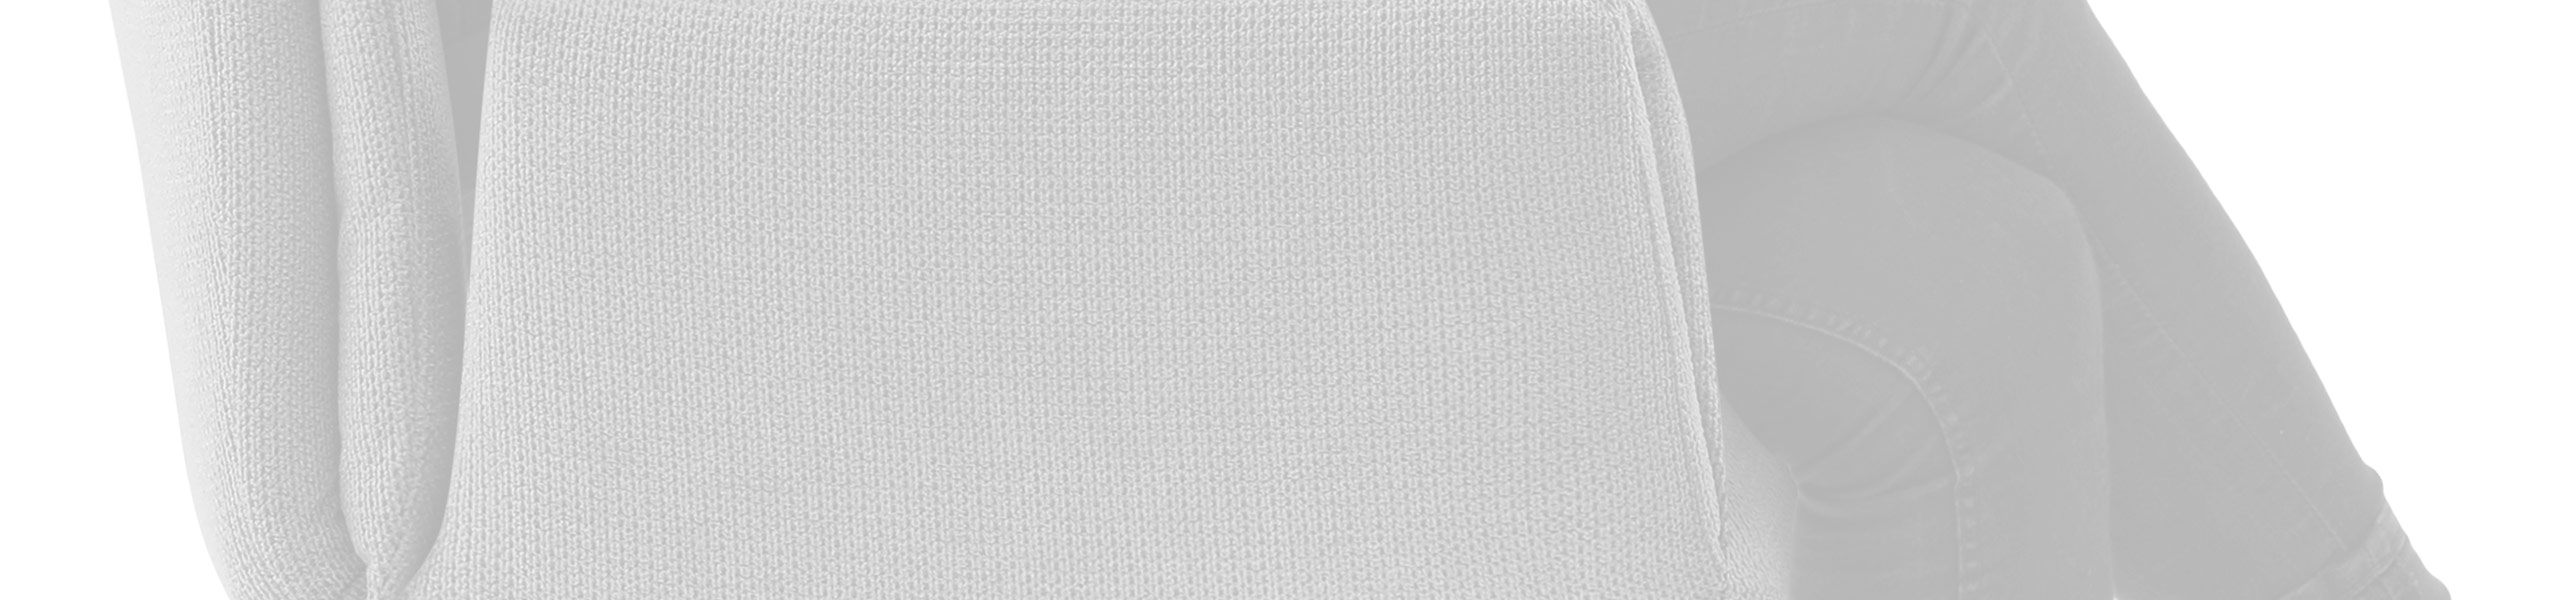 Neve Arm Chair Grey Fabric Review Banner